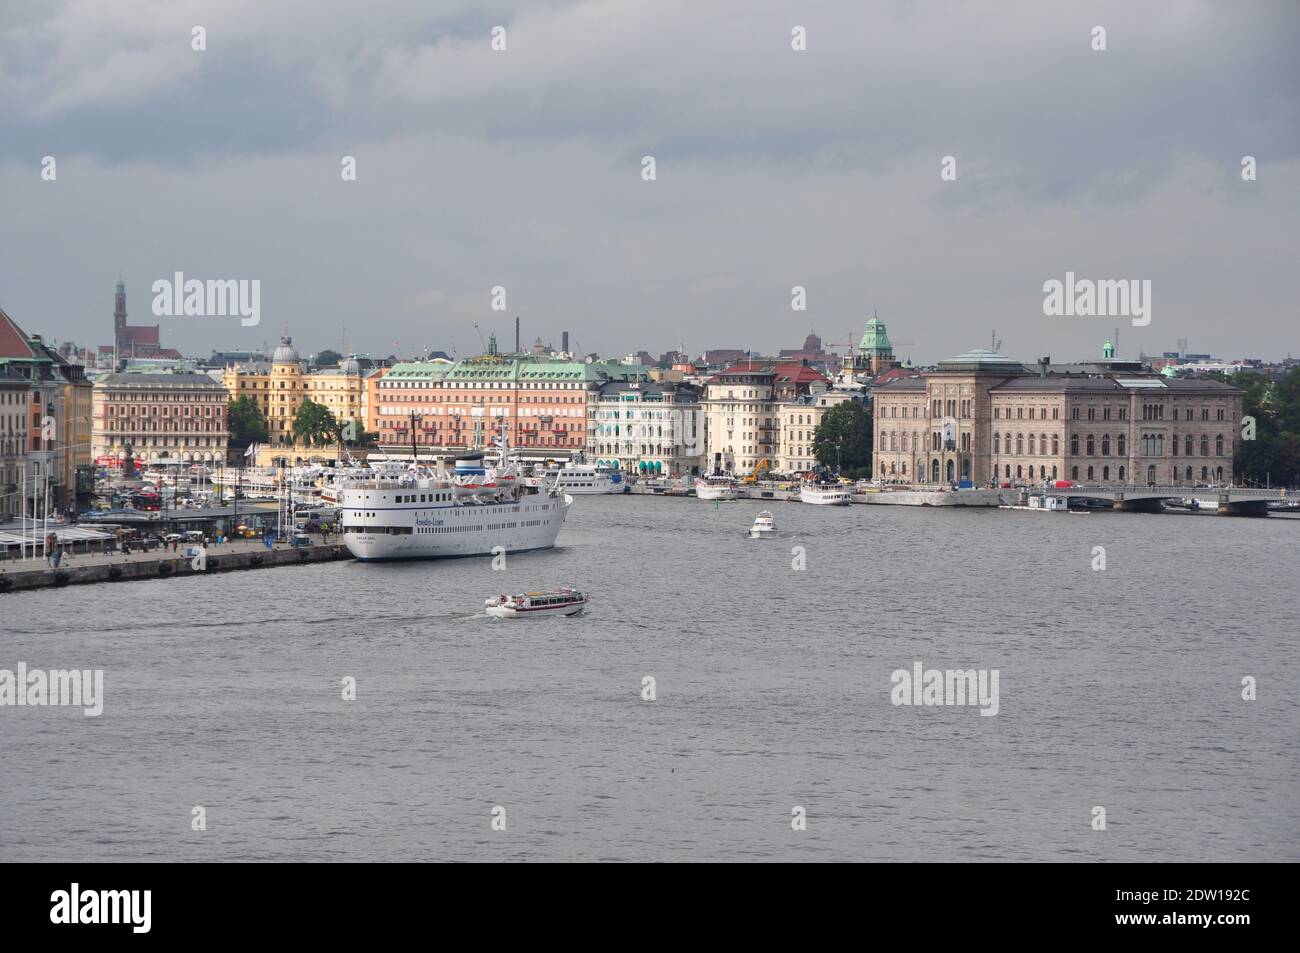 View of the Stockholm harbor. Stock Photo